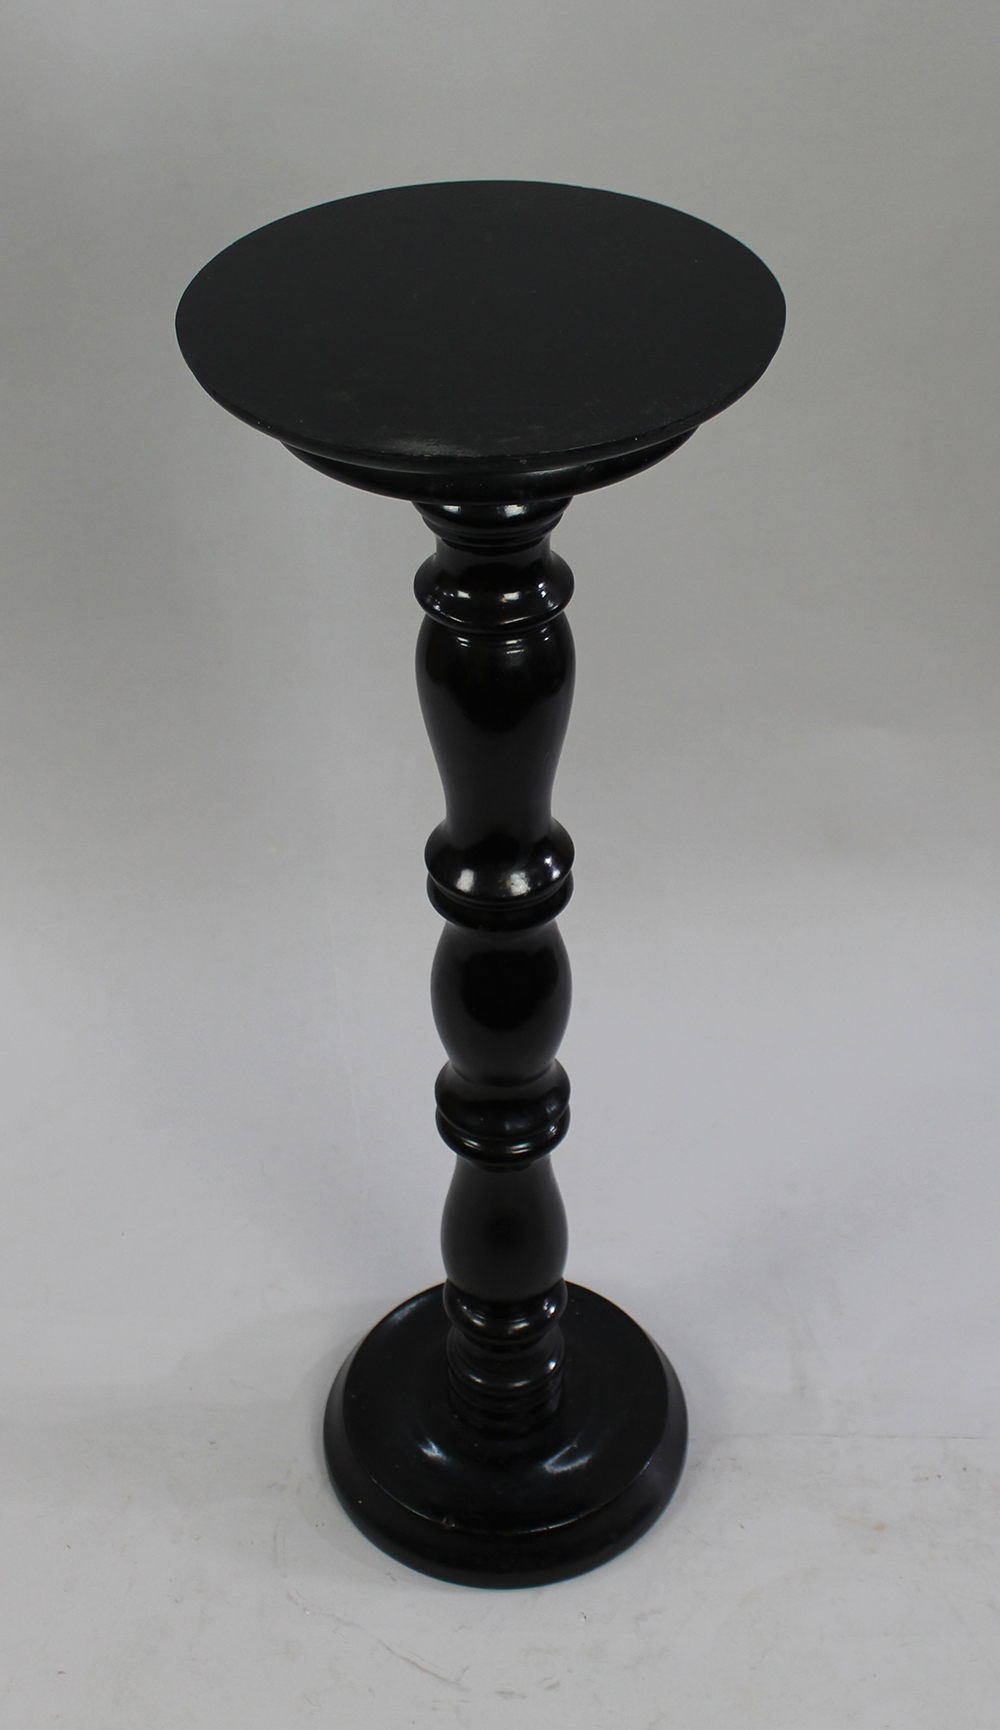 Early 20th c. Ebonized Wooden Pedestal - Image 2 of 3